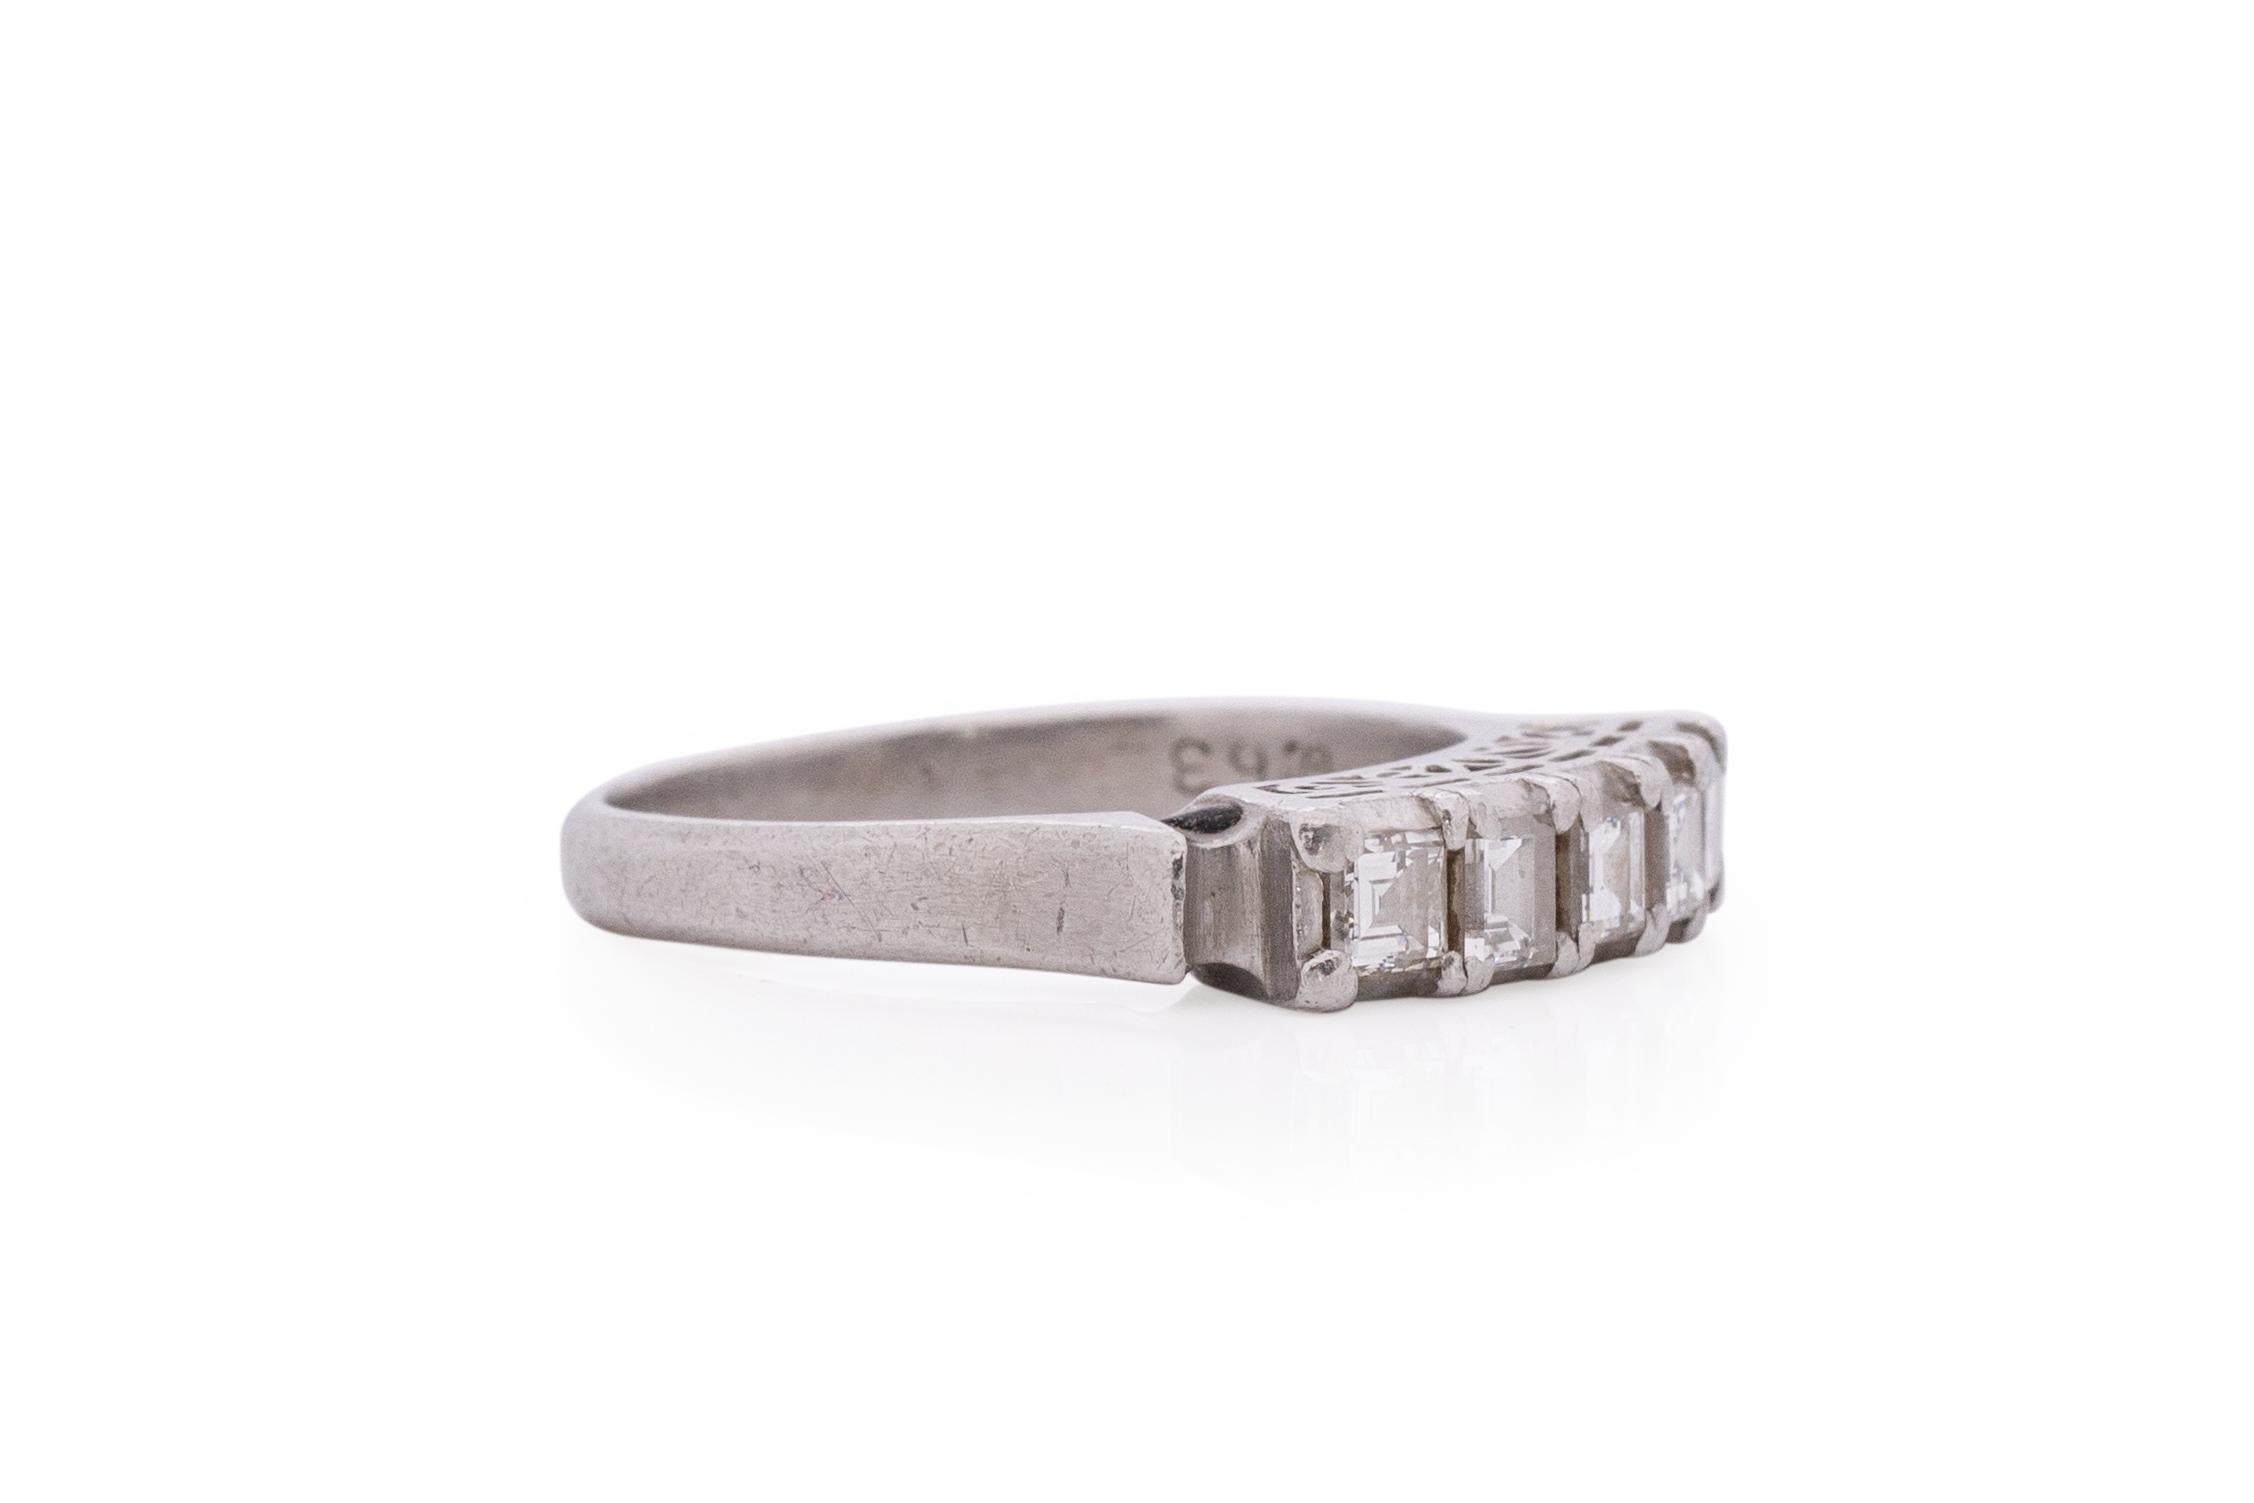 Item Details: 
Ring Size: 7
Metal Type: Platinum [Hallmarked, and Tested]
Weight: 3.5 grams

Diamond Details:
Weight: .63 carat total weight
Cut: Antique Carre Cut
Color: G
Clarity: VS

Finger to Top of Stone Measurement: 5.5mm
Condition: Excellent